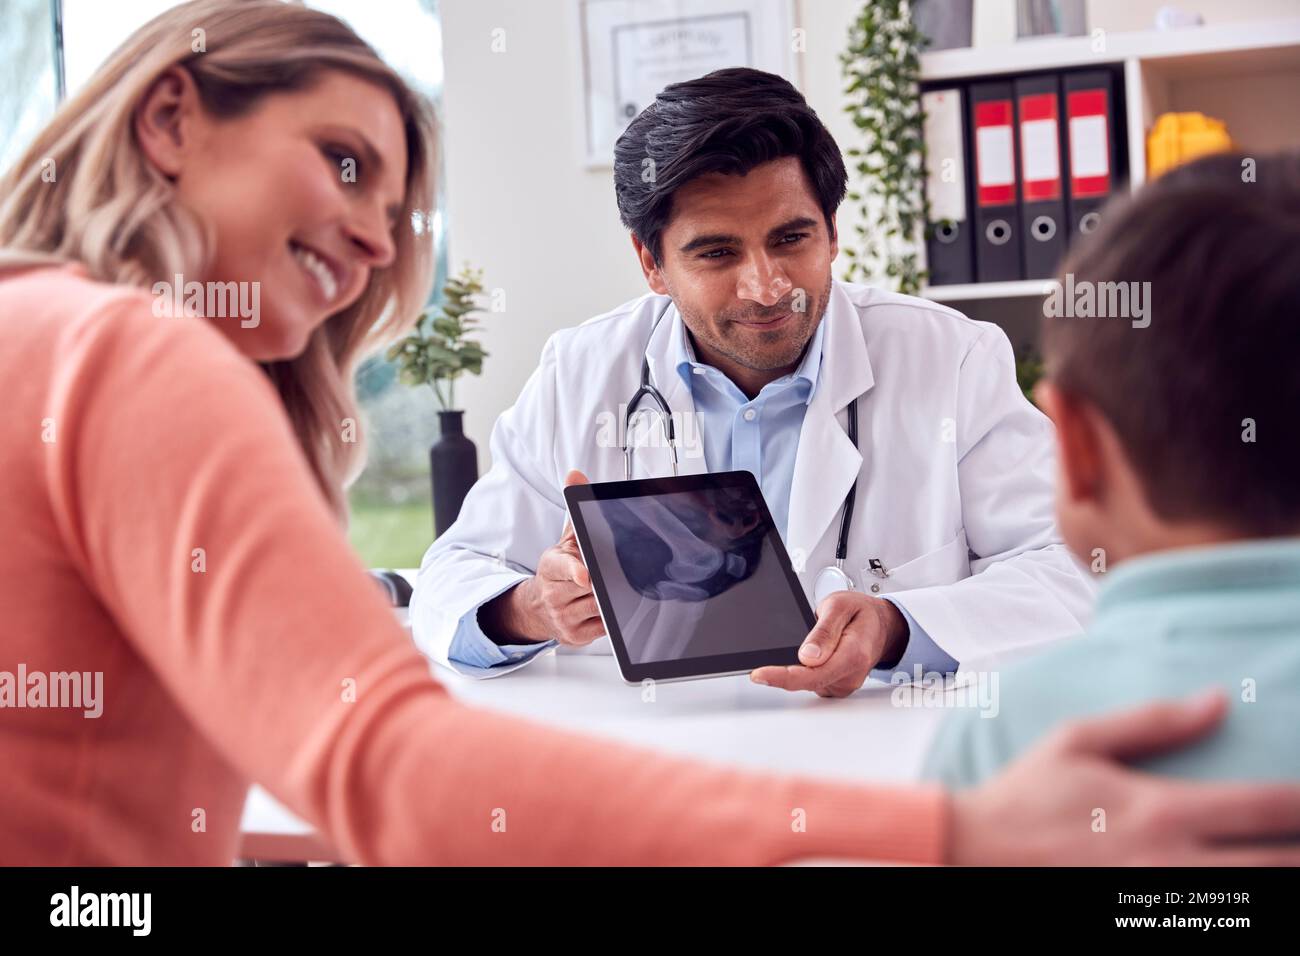 Doctor Or GP In White Coat Meeting Mother And Son For Appointment Looking At Scan On Digital Tablet Stock Photo